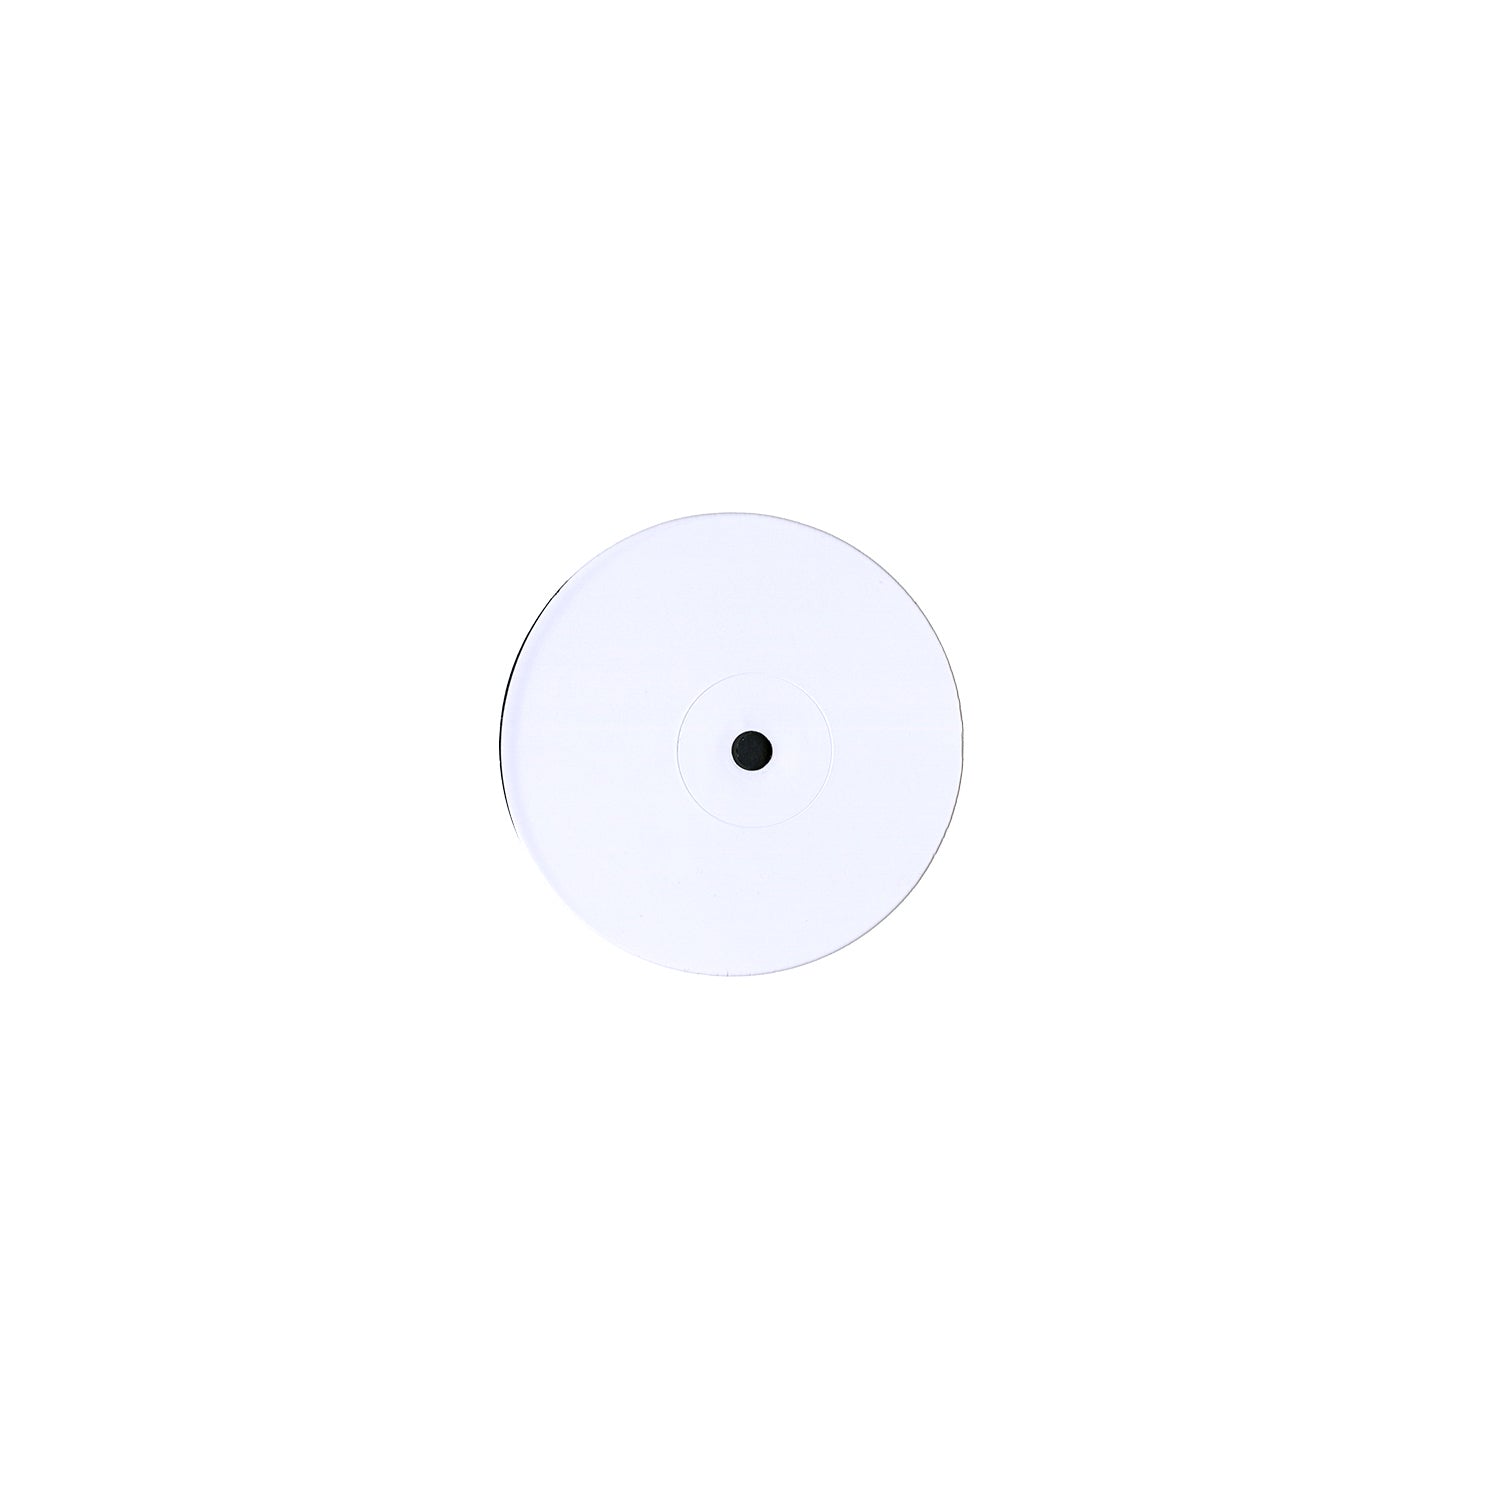 Something New: Unreleased Gold Test Press